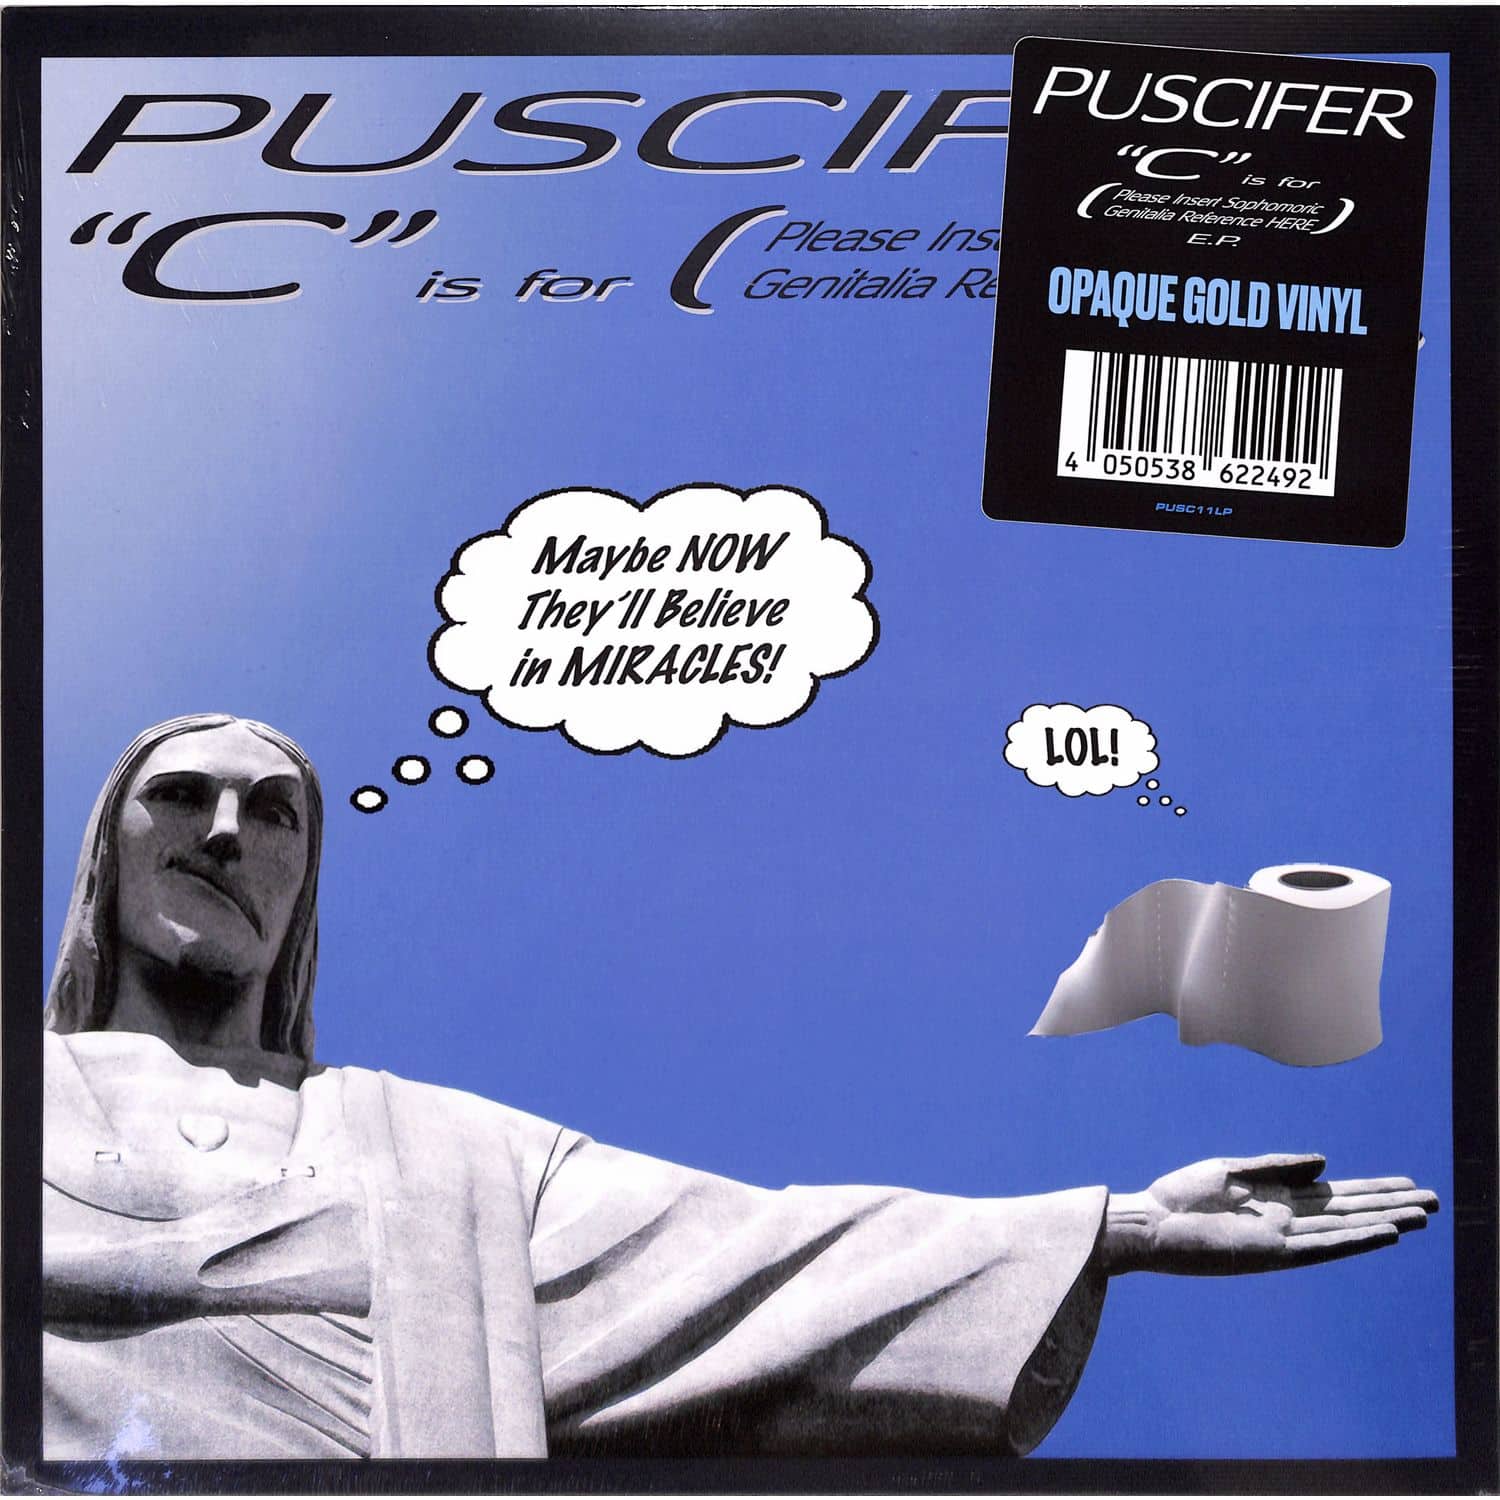 Puscifer - C IS FOR